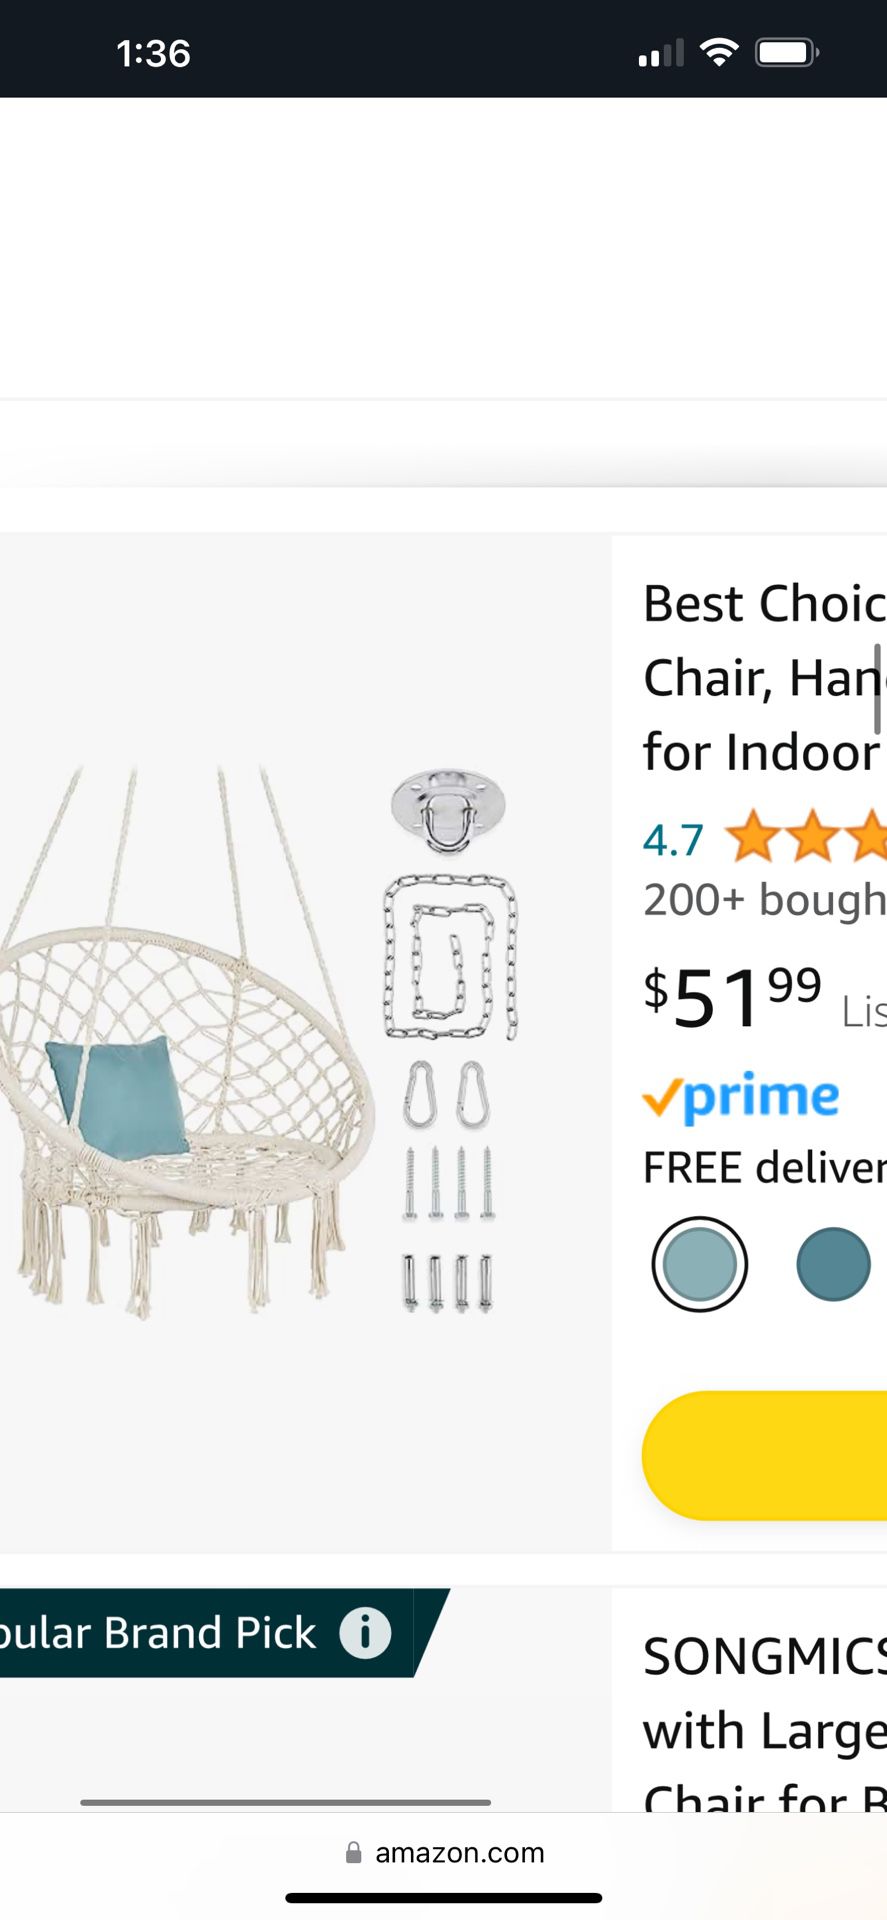 Heavy Duty Hanging Chair